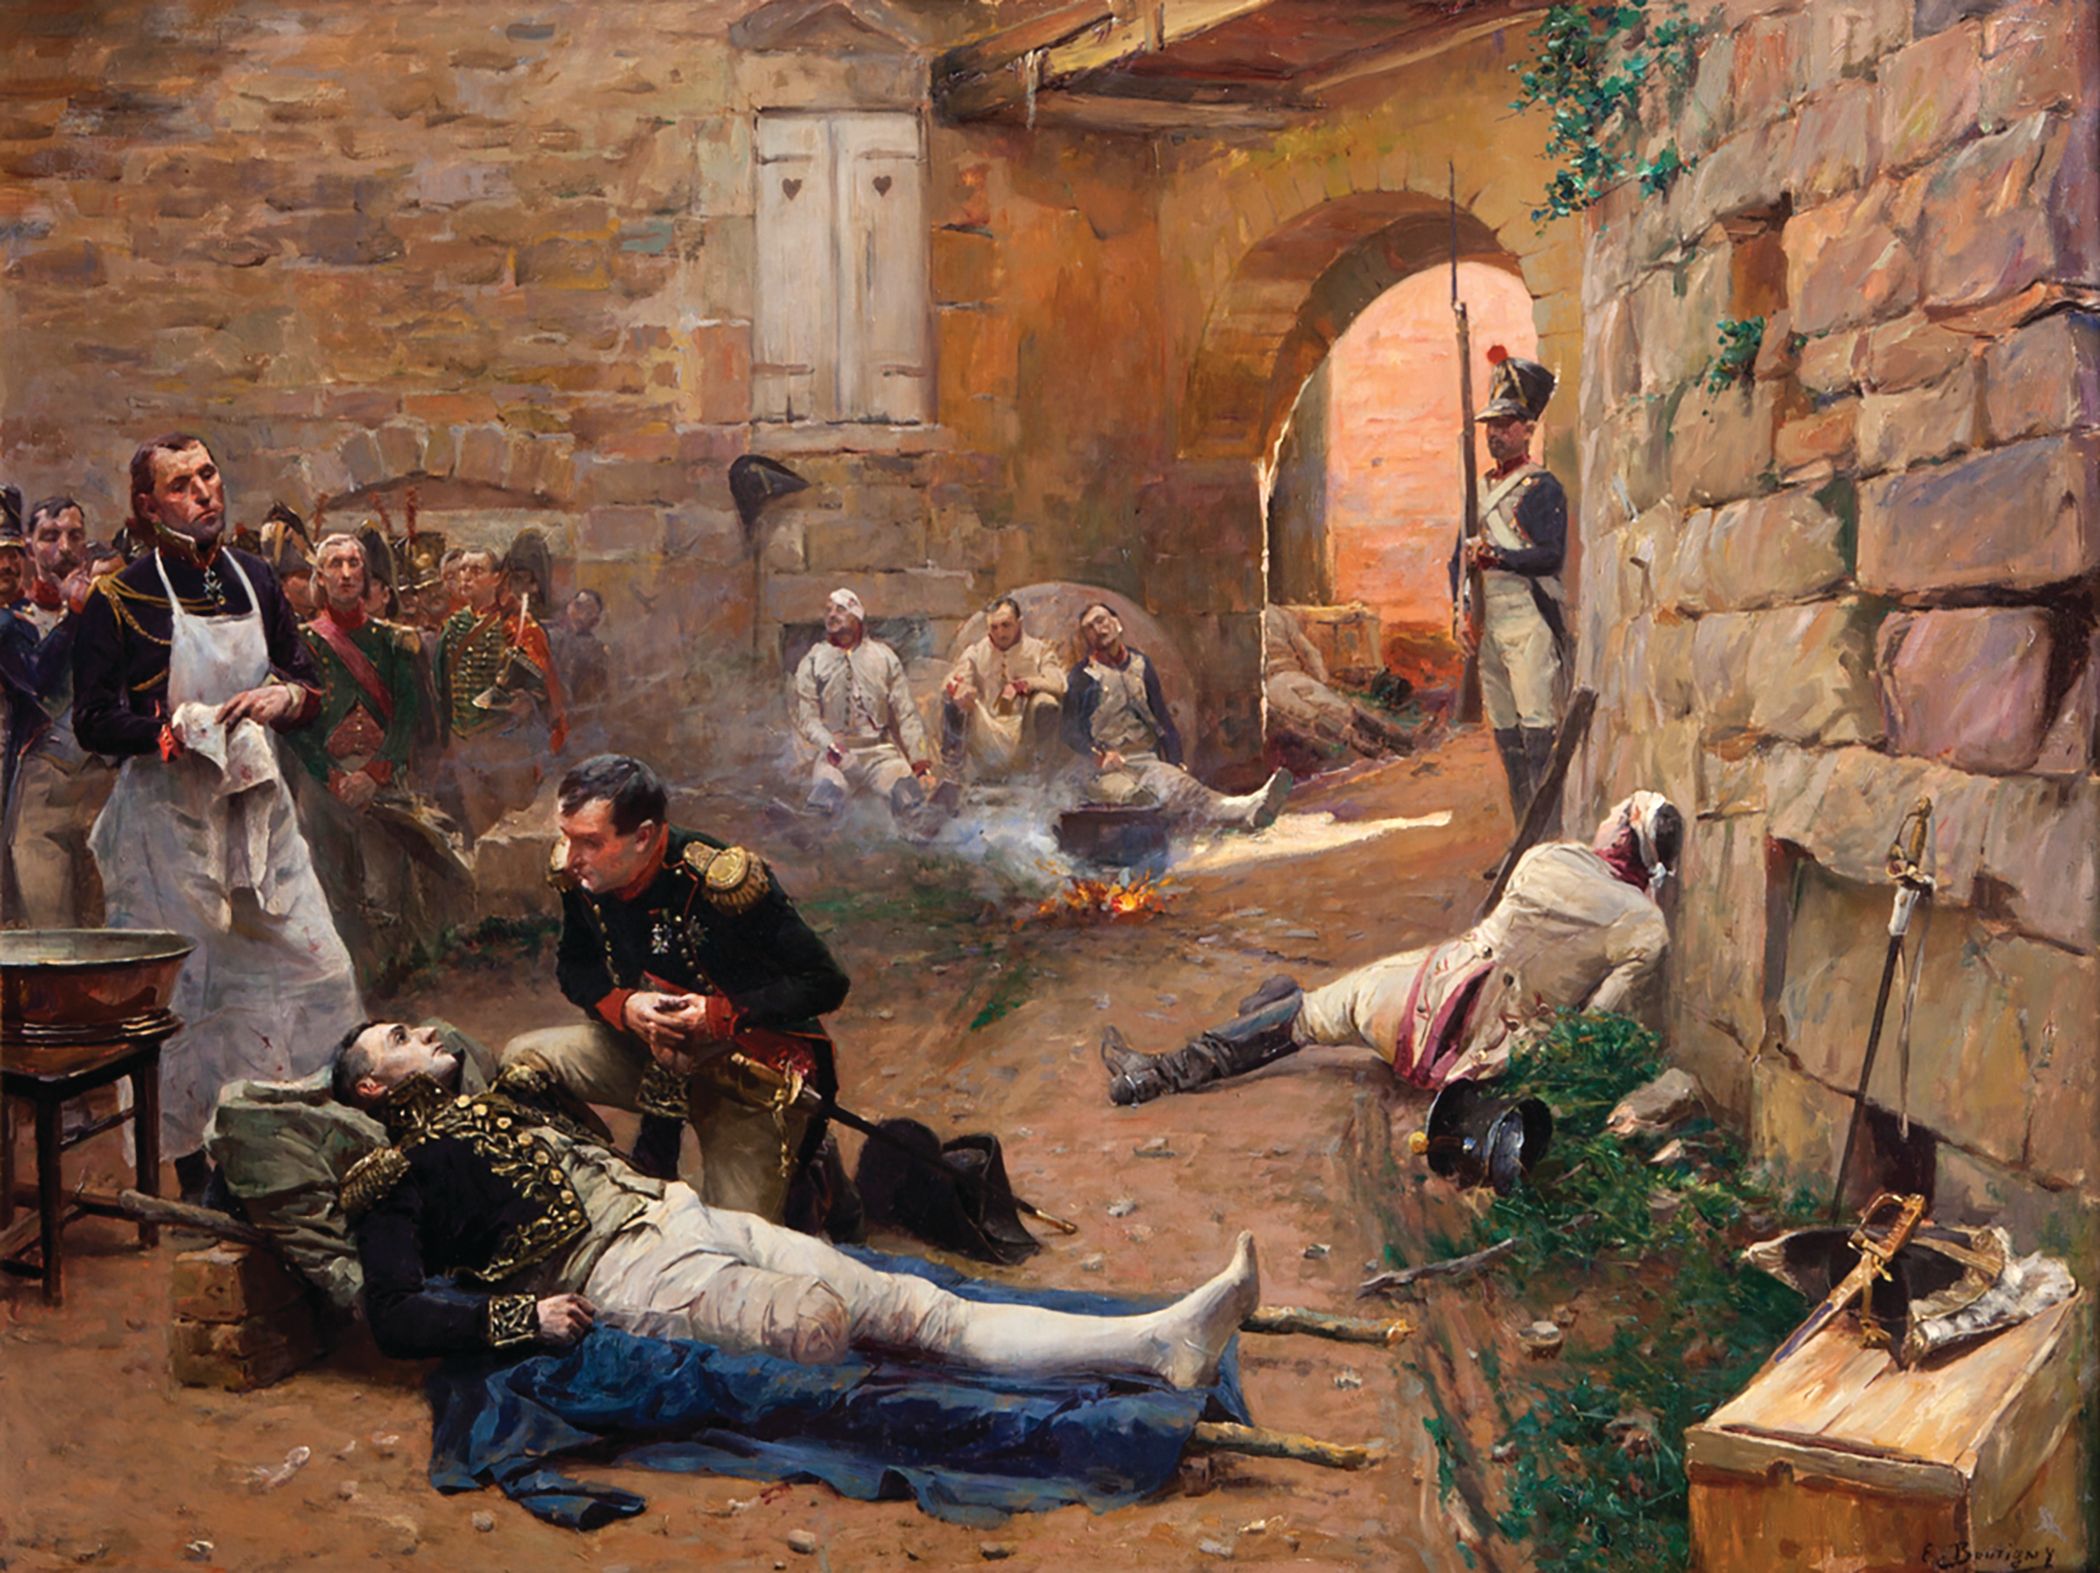 Napoleon visits his friend, Marshal Jean Lannes, who was mortally wounded at the Battle of Aspern-Essling (May 21-22,1809) as Surgeon Larrey looks on in this 1894 painting by Paul-Émile Boutigny.